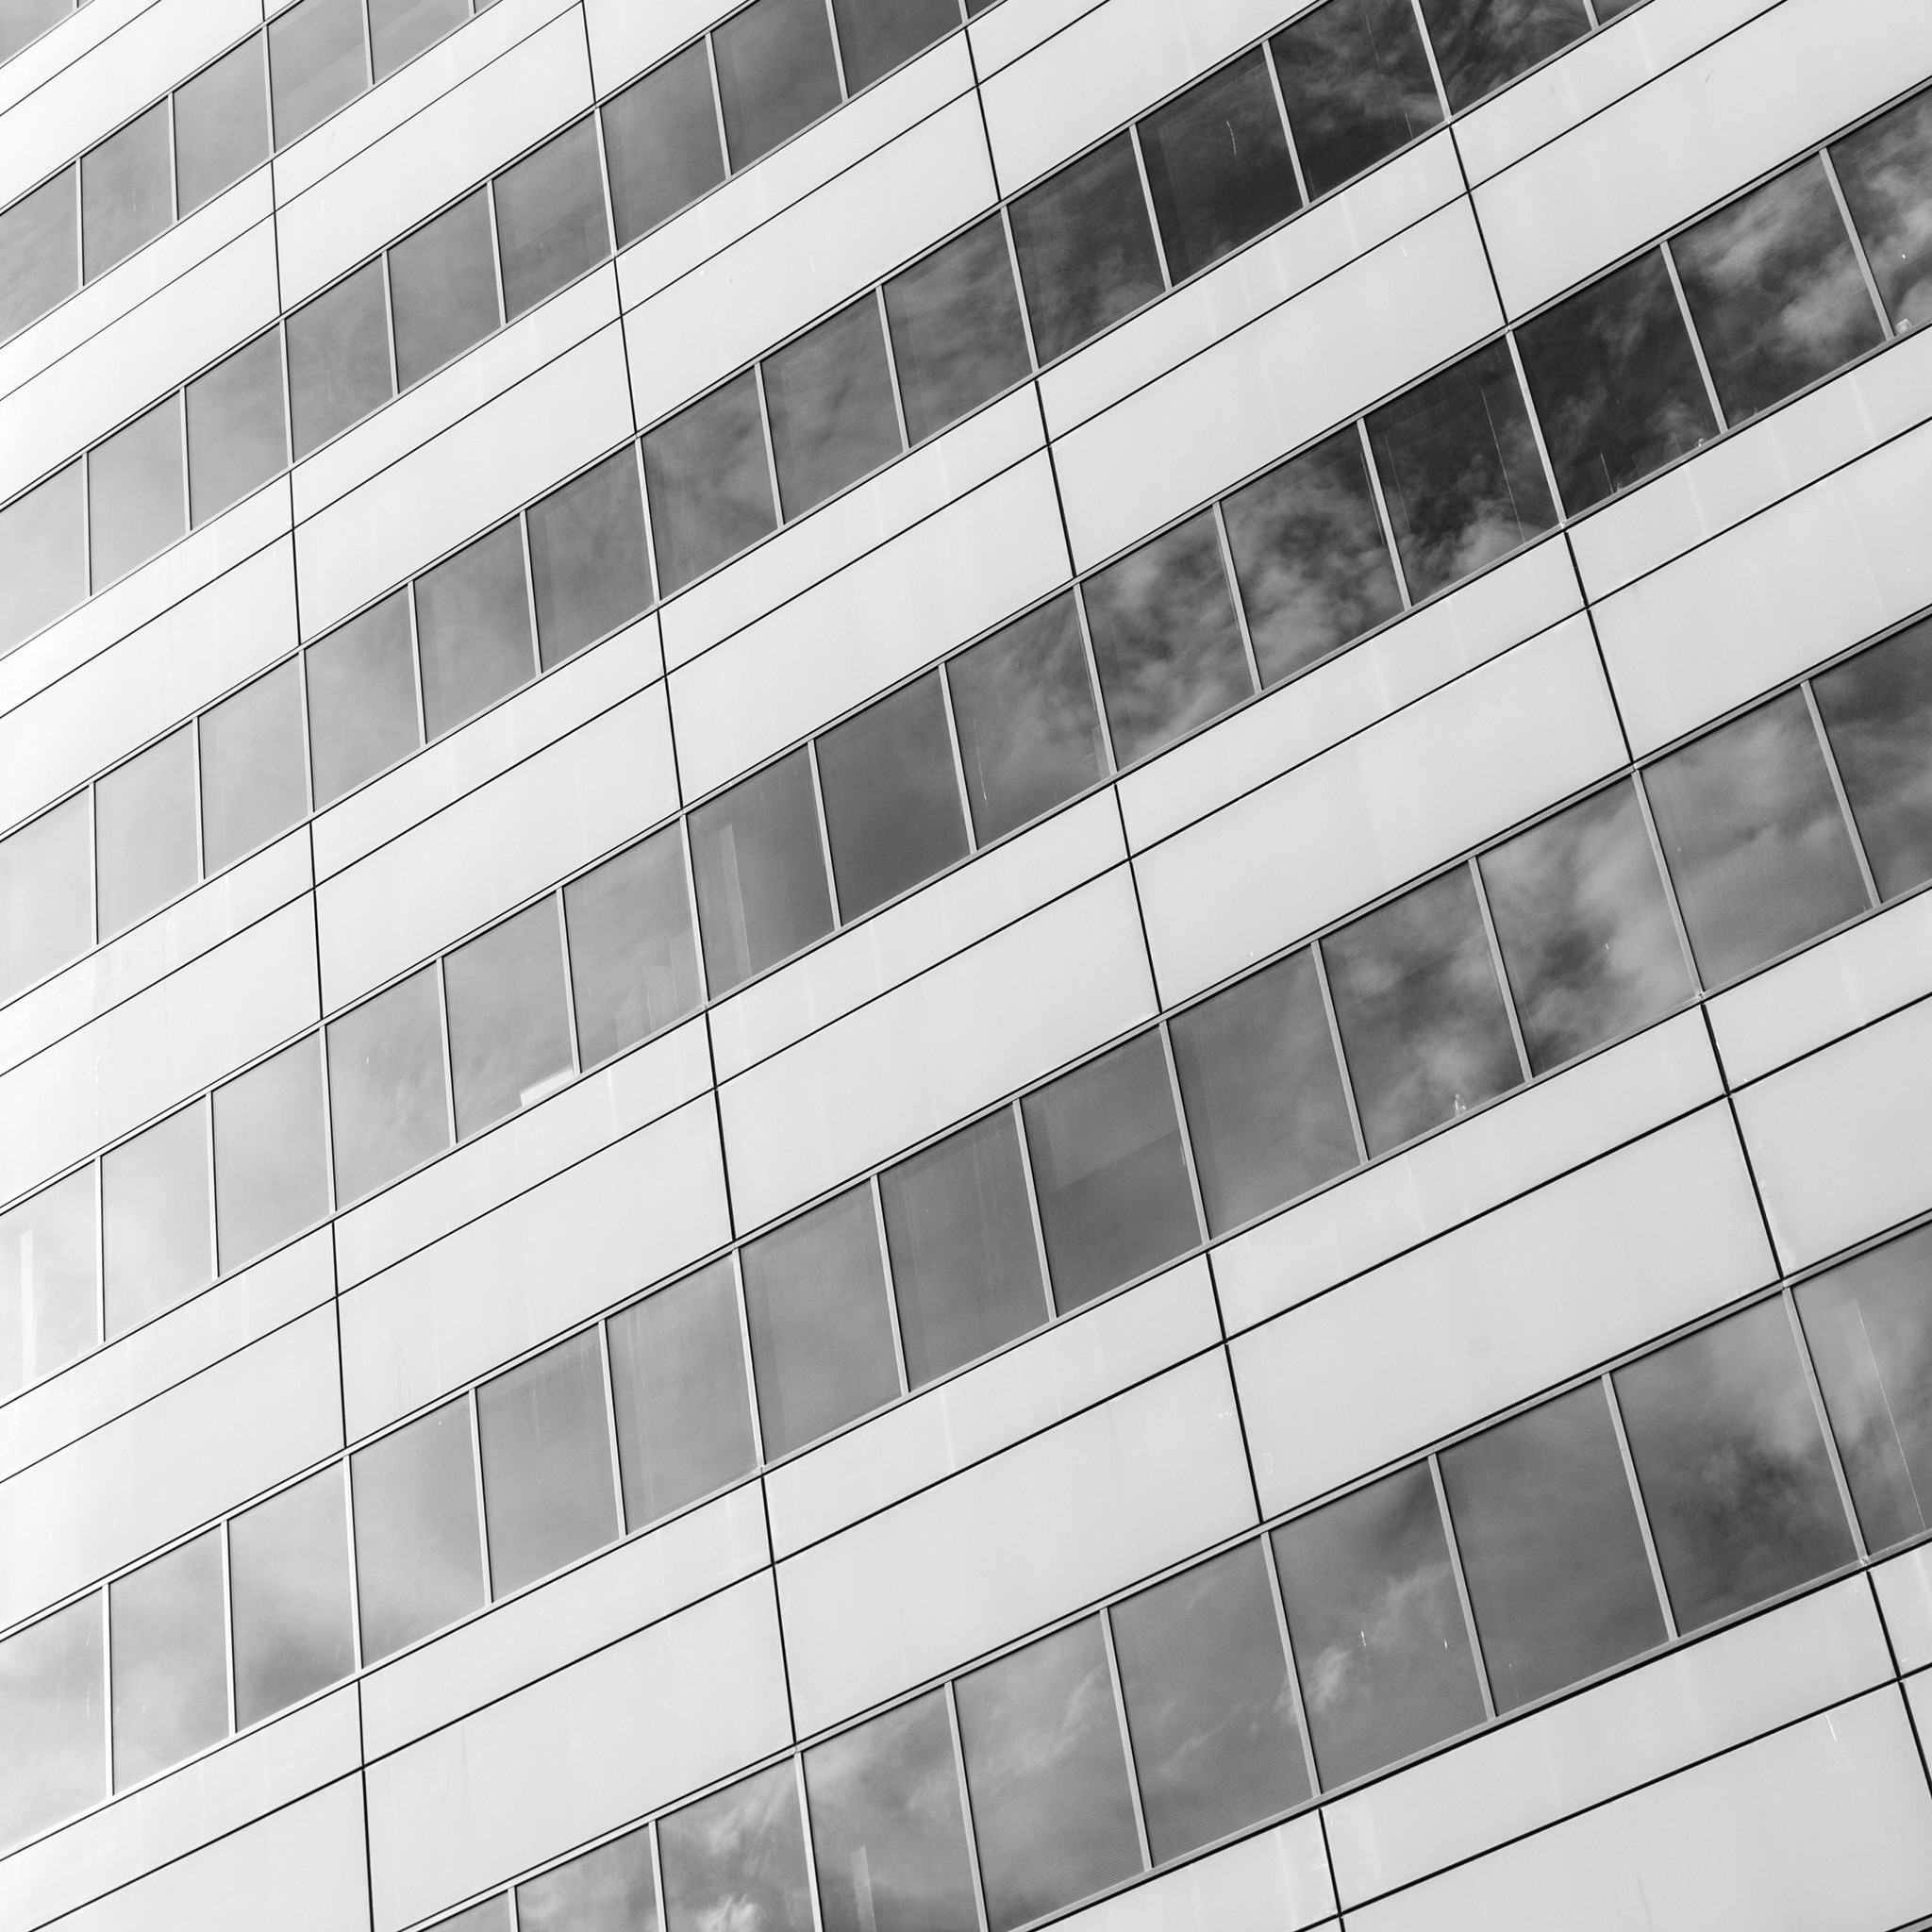 2048x2048 charles henry - bw office building facade ipad wallpaper